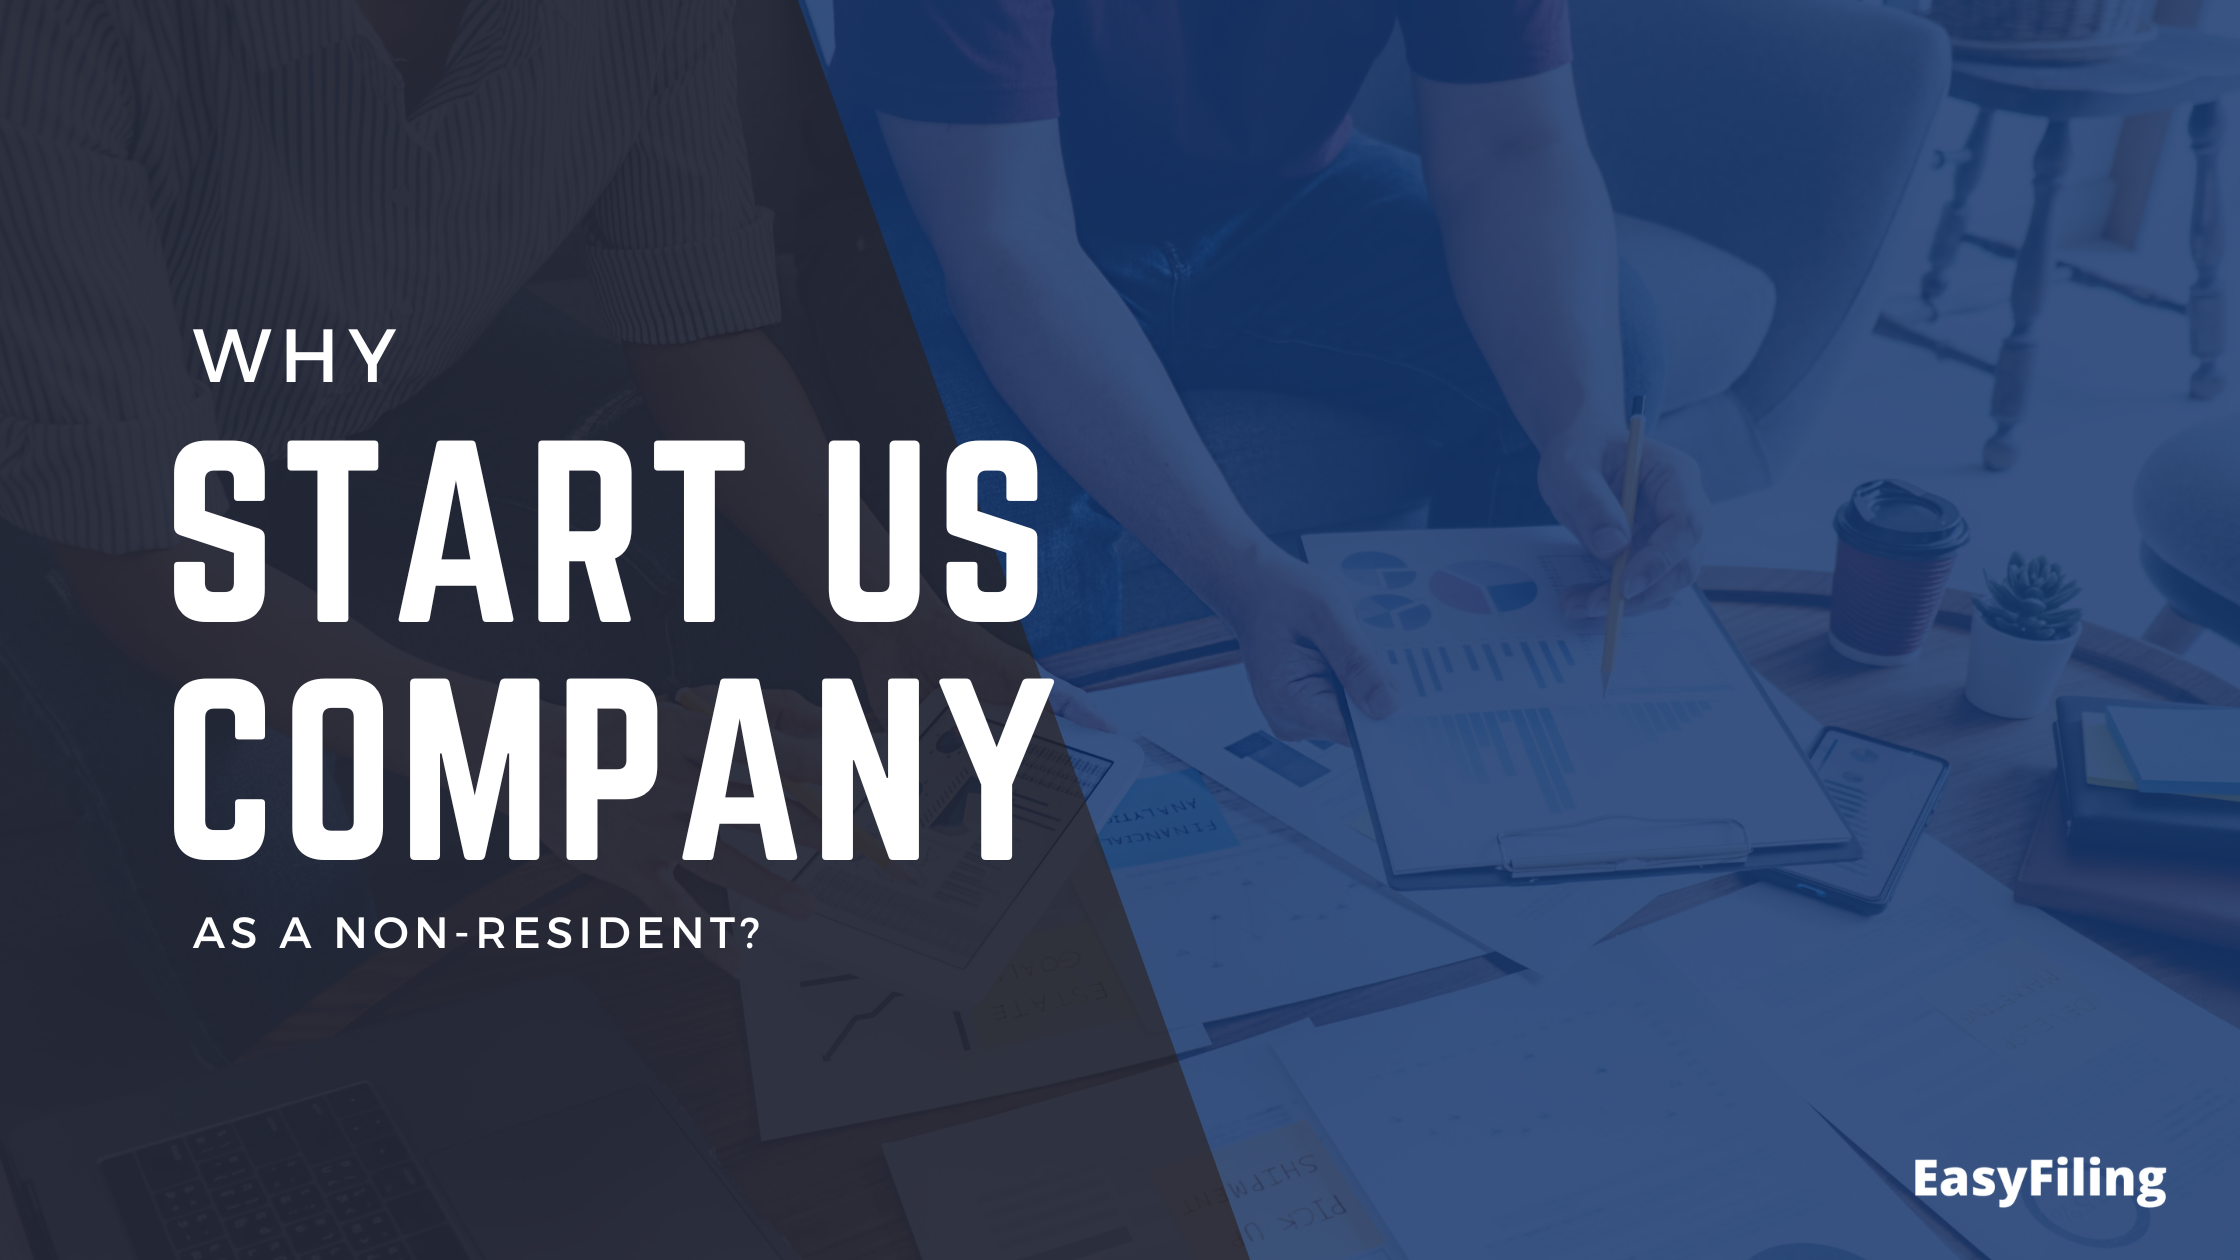 Why start a U.S. Company as a Non-Resident